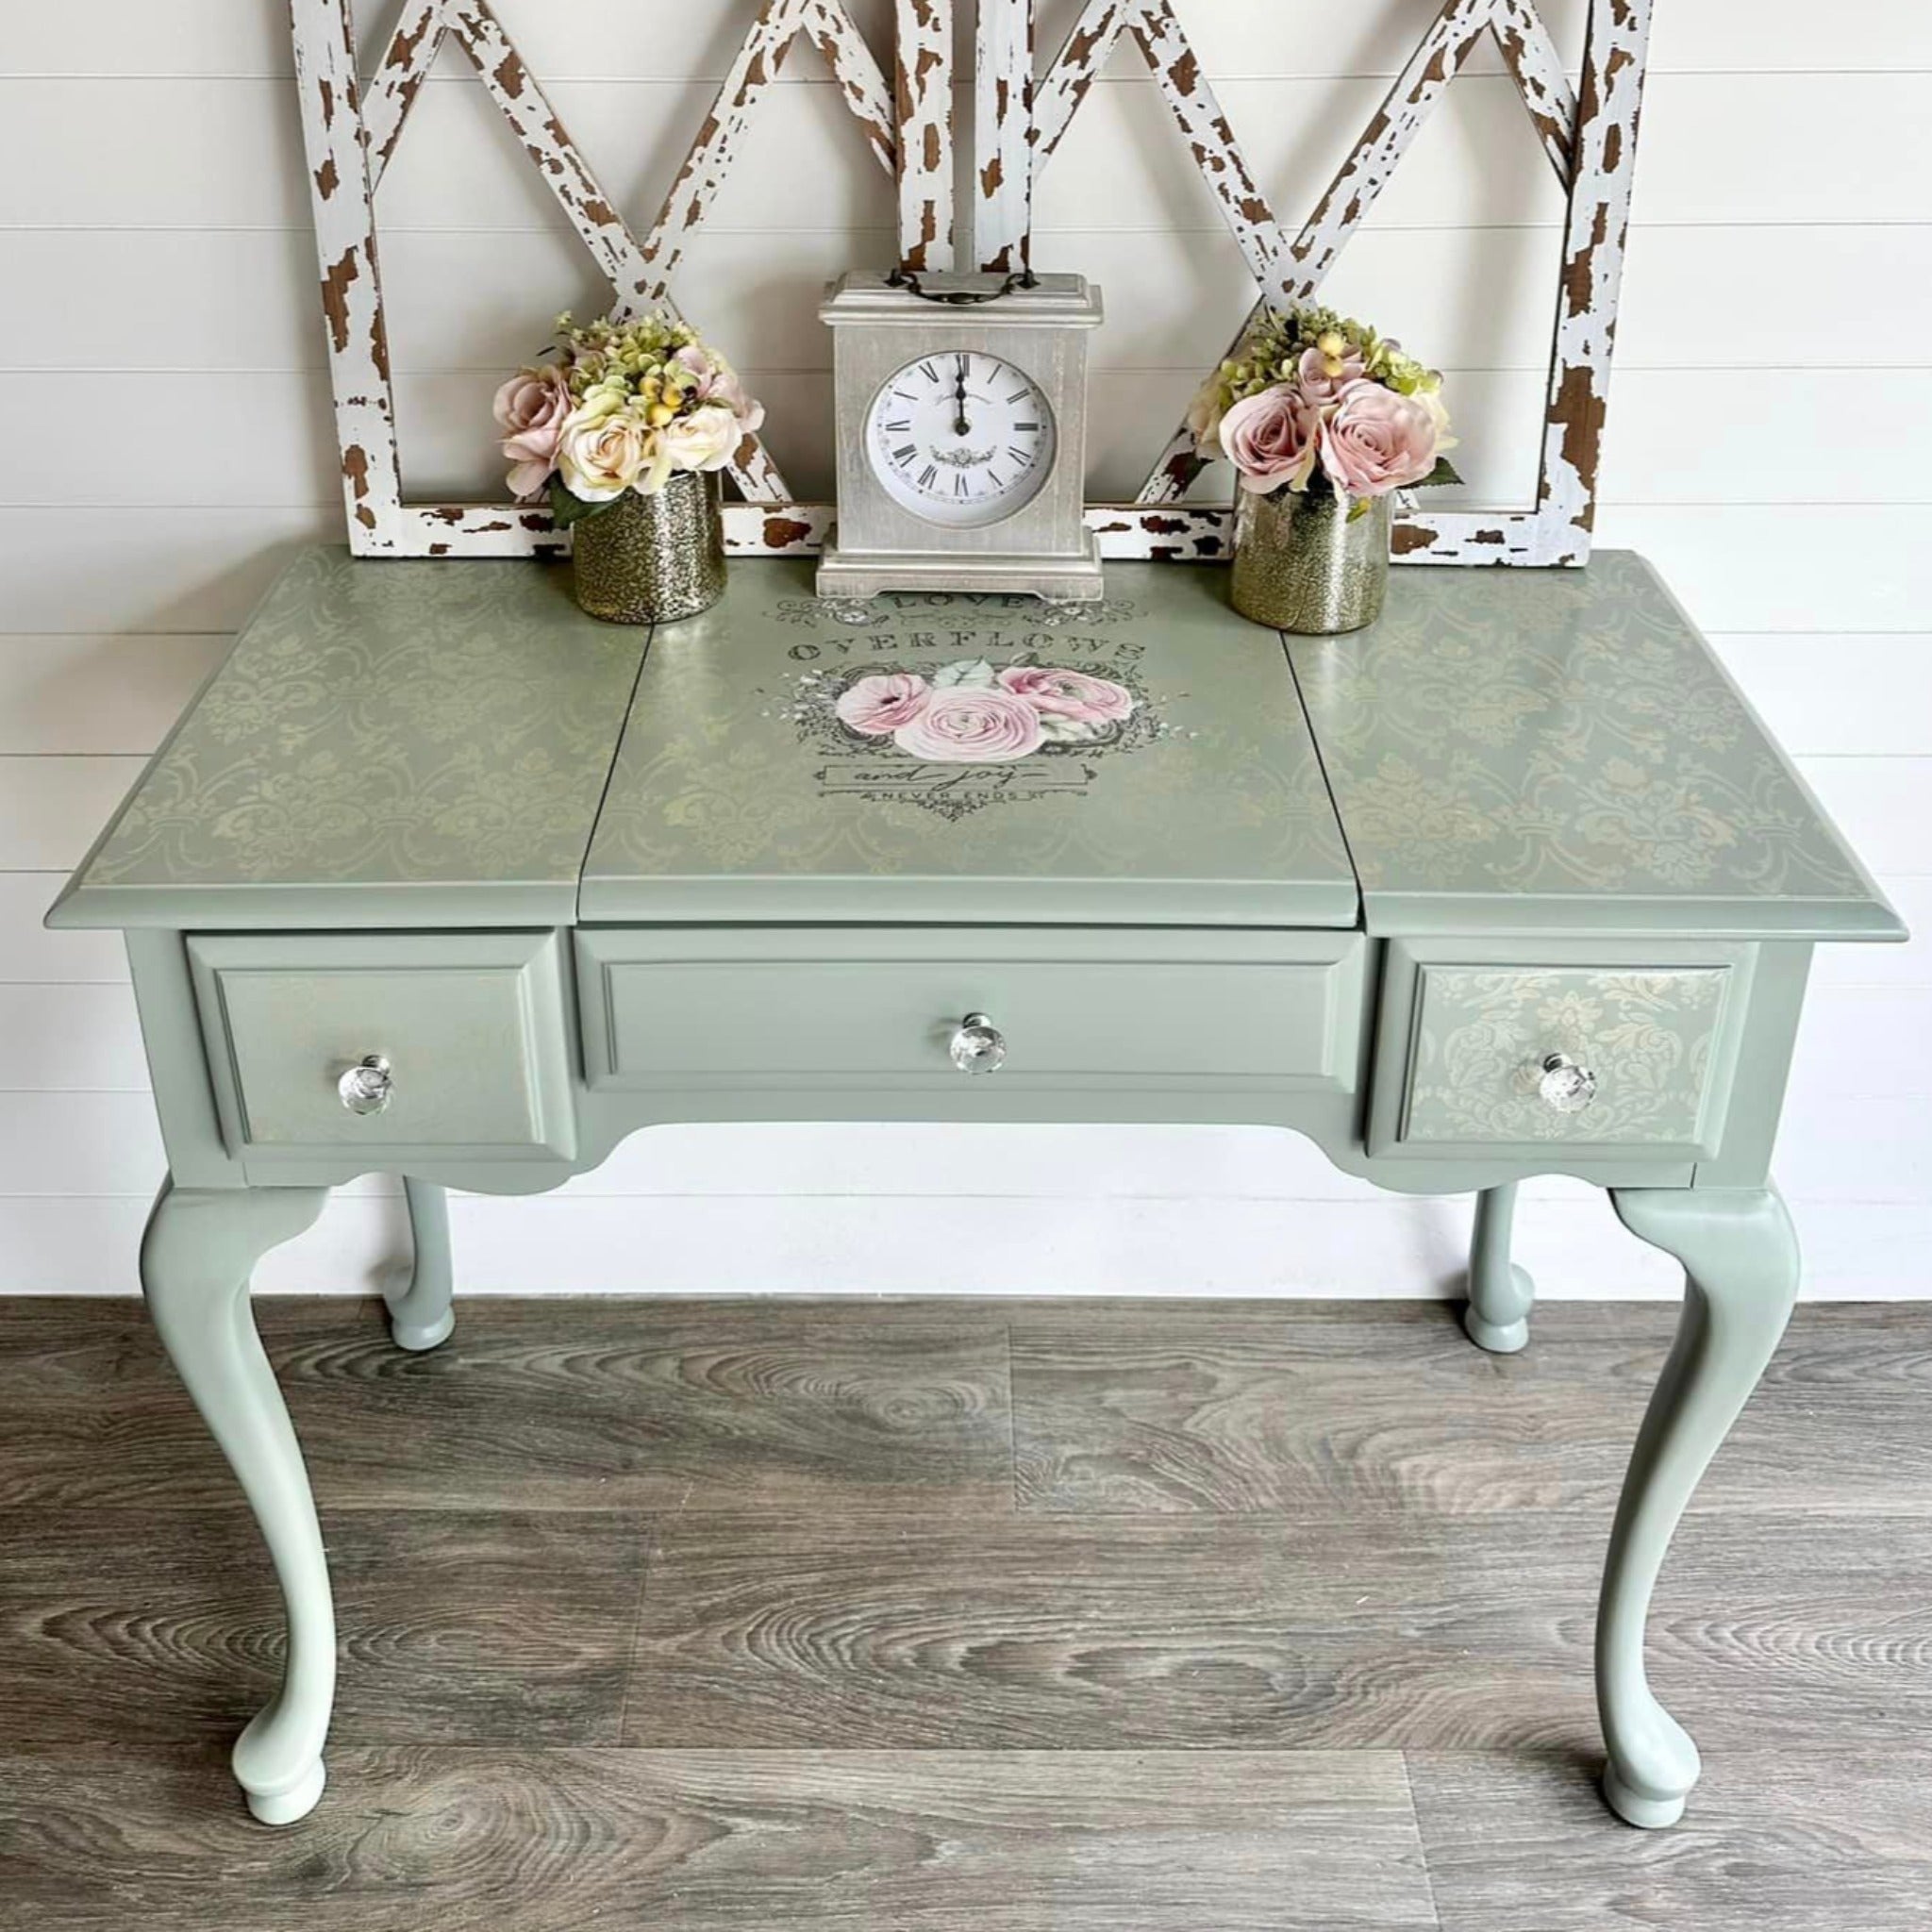 A vintage vanity desk refurbished by The Shabby Pearl is painted light sage green and features ReDesign with Prima's Overflowing Love transfer in the middle of the desktop on a lift-up lid.